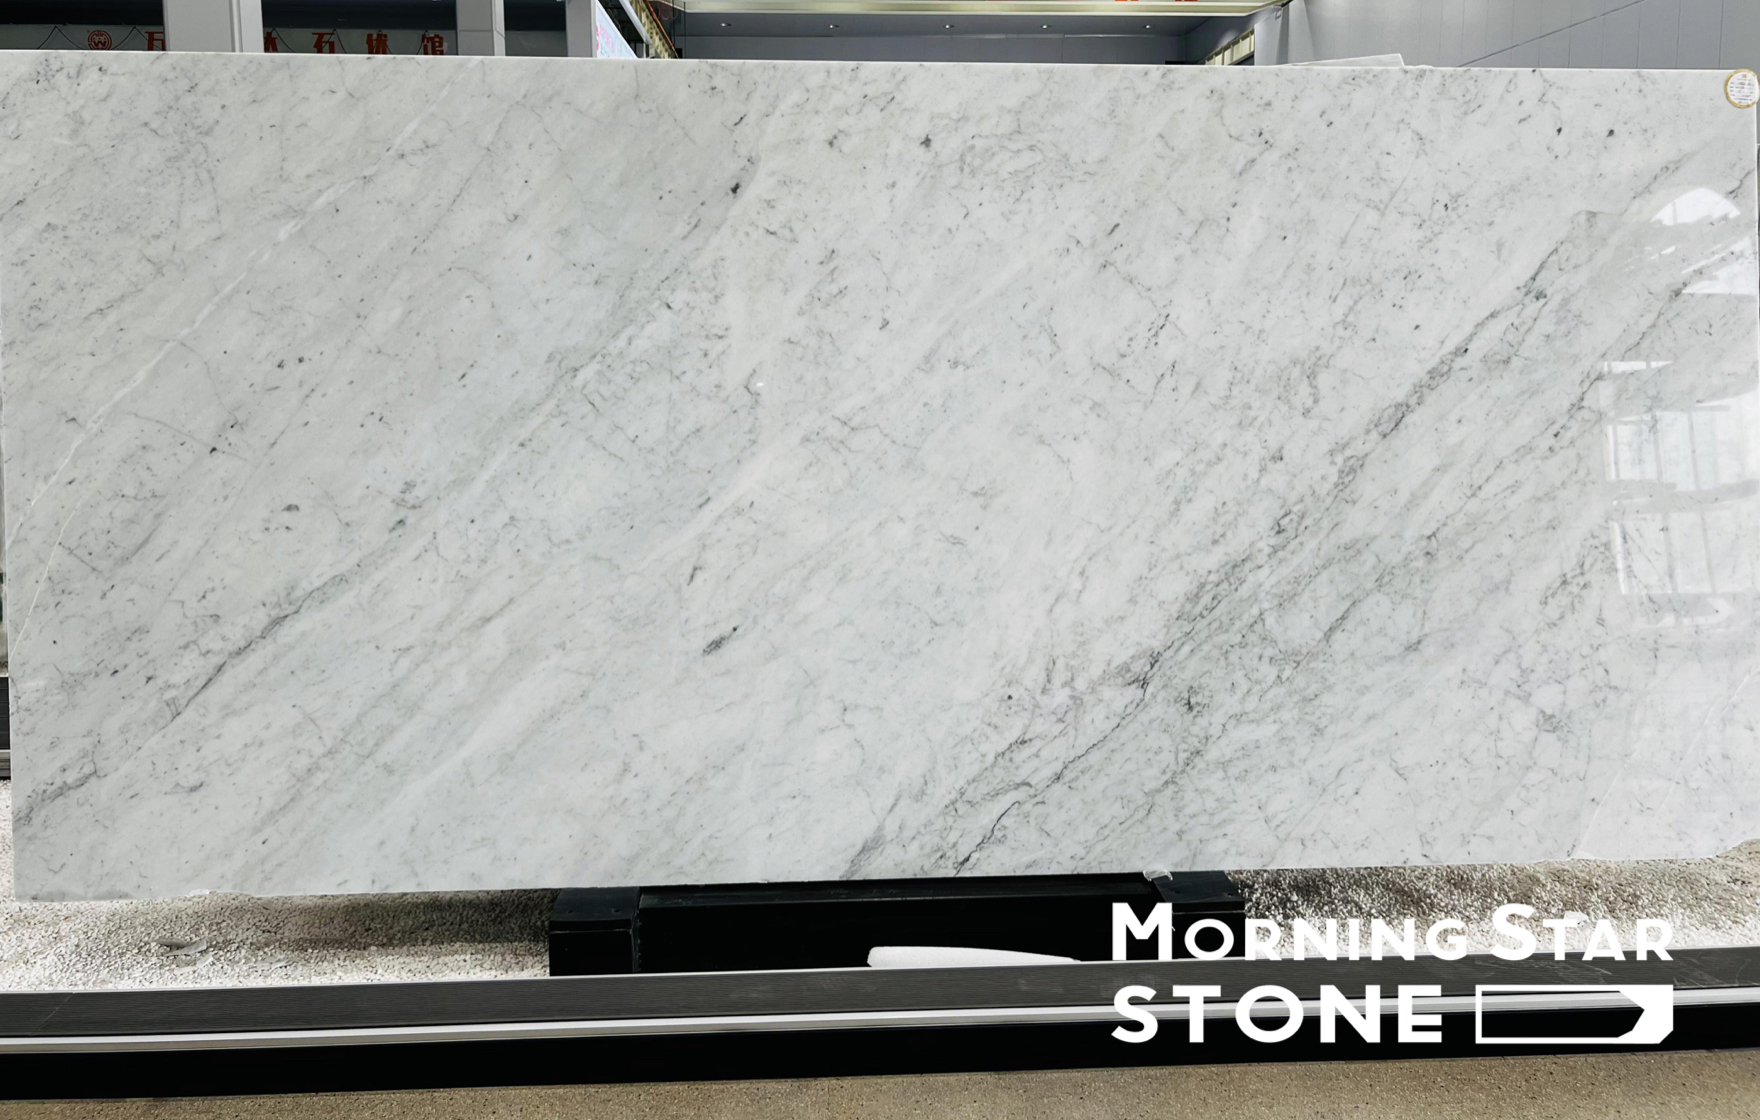 The Timeless Elegance of Carrara Marble: A Look into Morningstar Stone’s Superior Quality Tiles